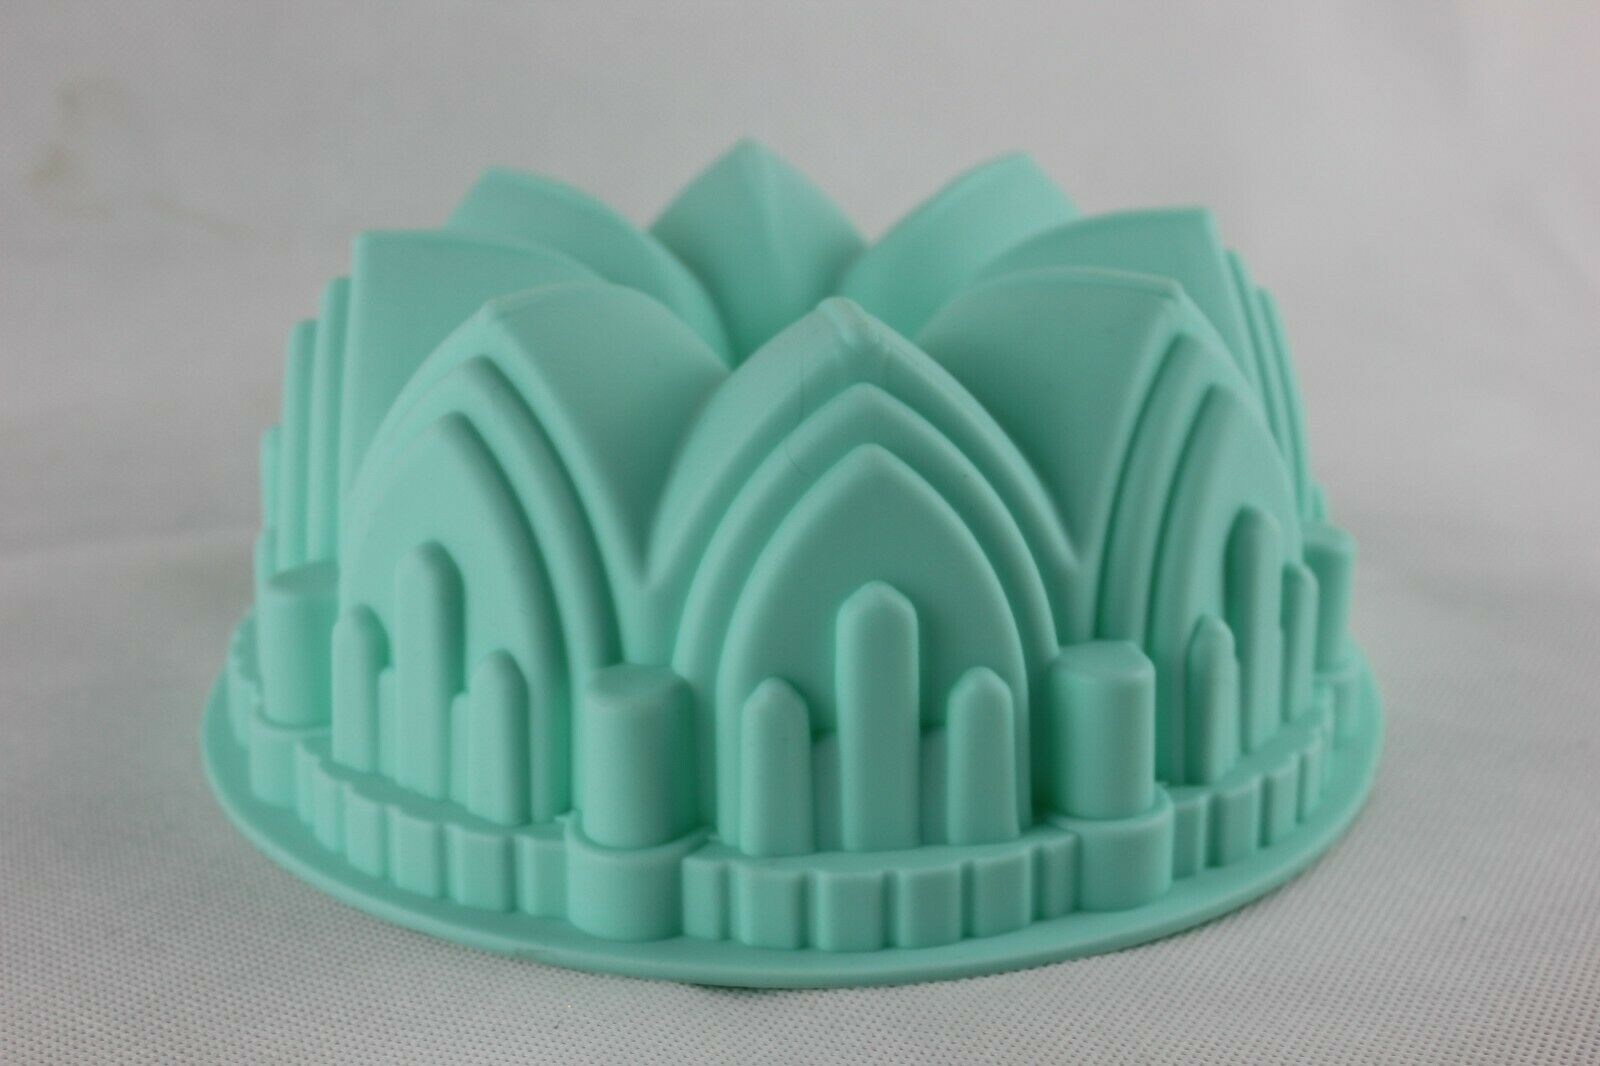 attachment-https://www.cupcakeaddicts.co.uk/wp-content/uploads/imported/6/Crown-Bunt-Gothic-Spiral-Shape-Silicone-Cake-Baking-Mould-Pan-Nonstick-Bakeware-324351990626-2.jpg